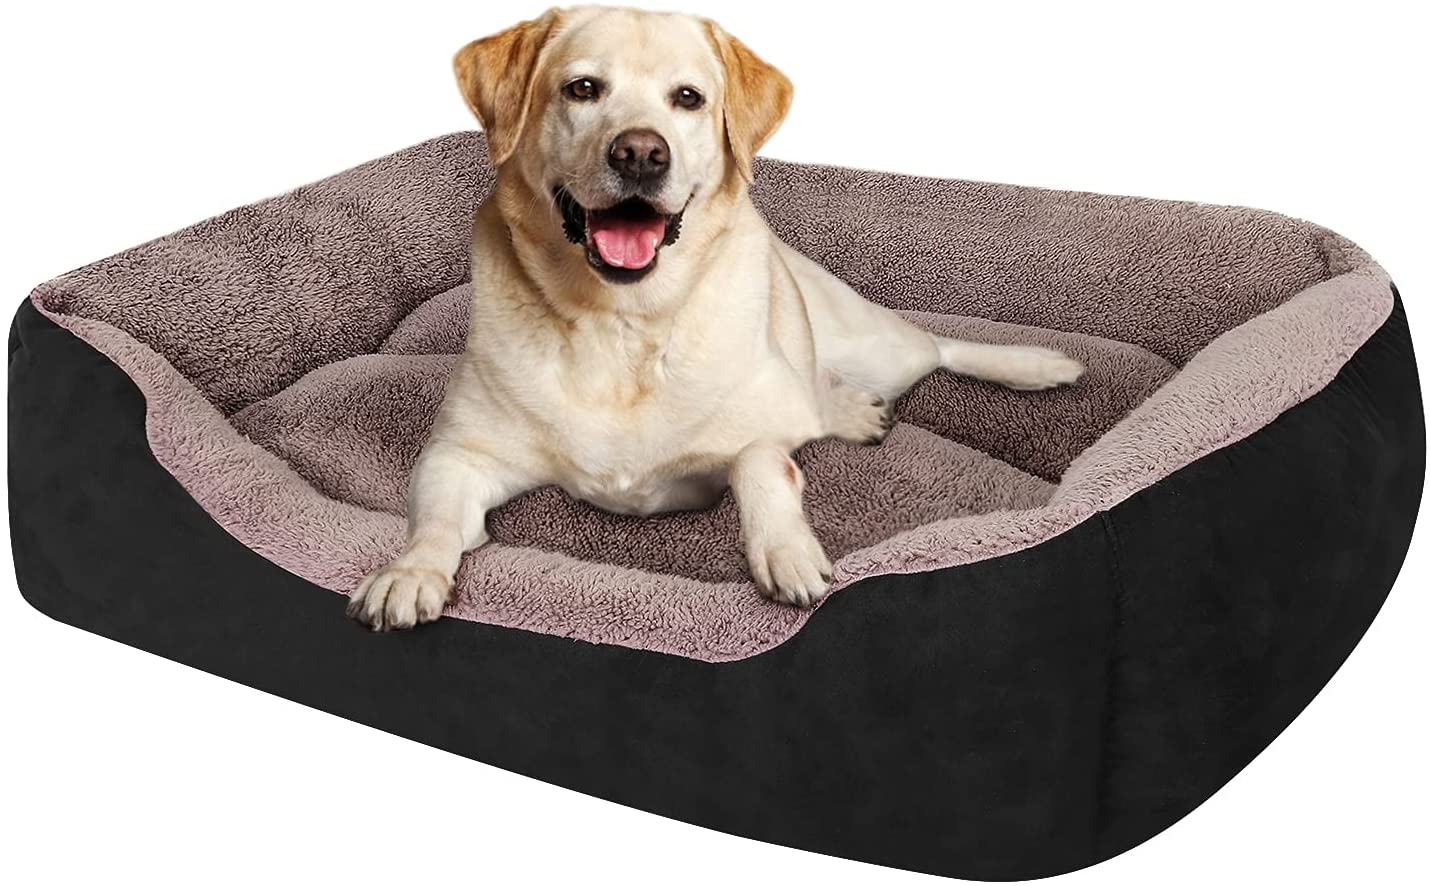 a dog's bed